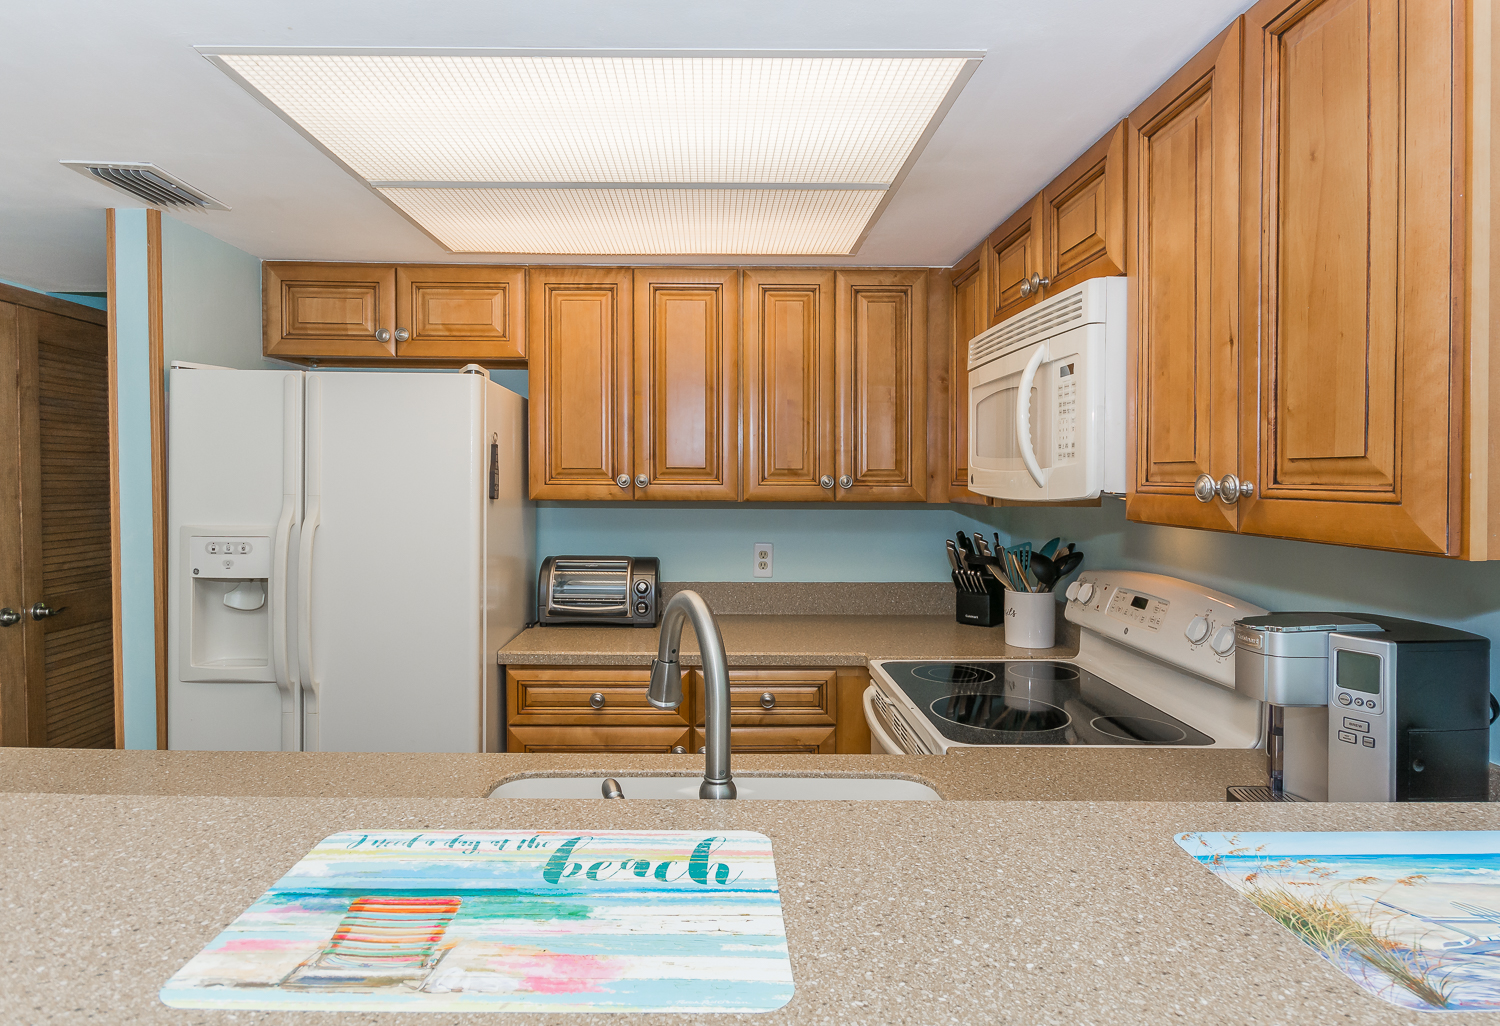 The fully equipped kitchen features GE appliances and everything you'll need to prepare your families favorite seaside dish.